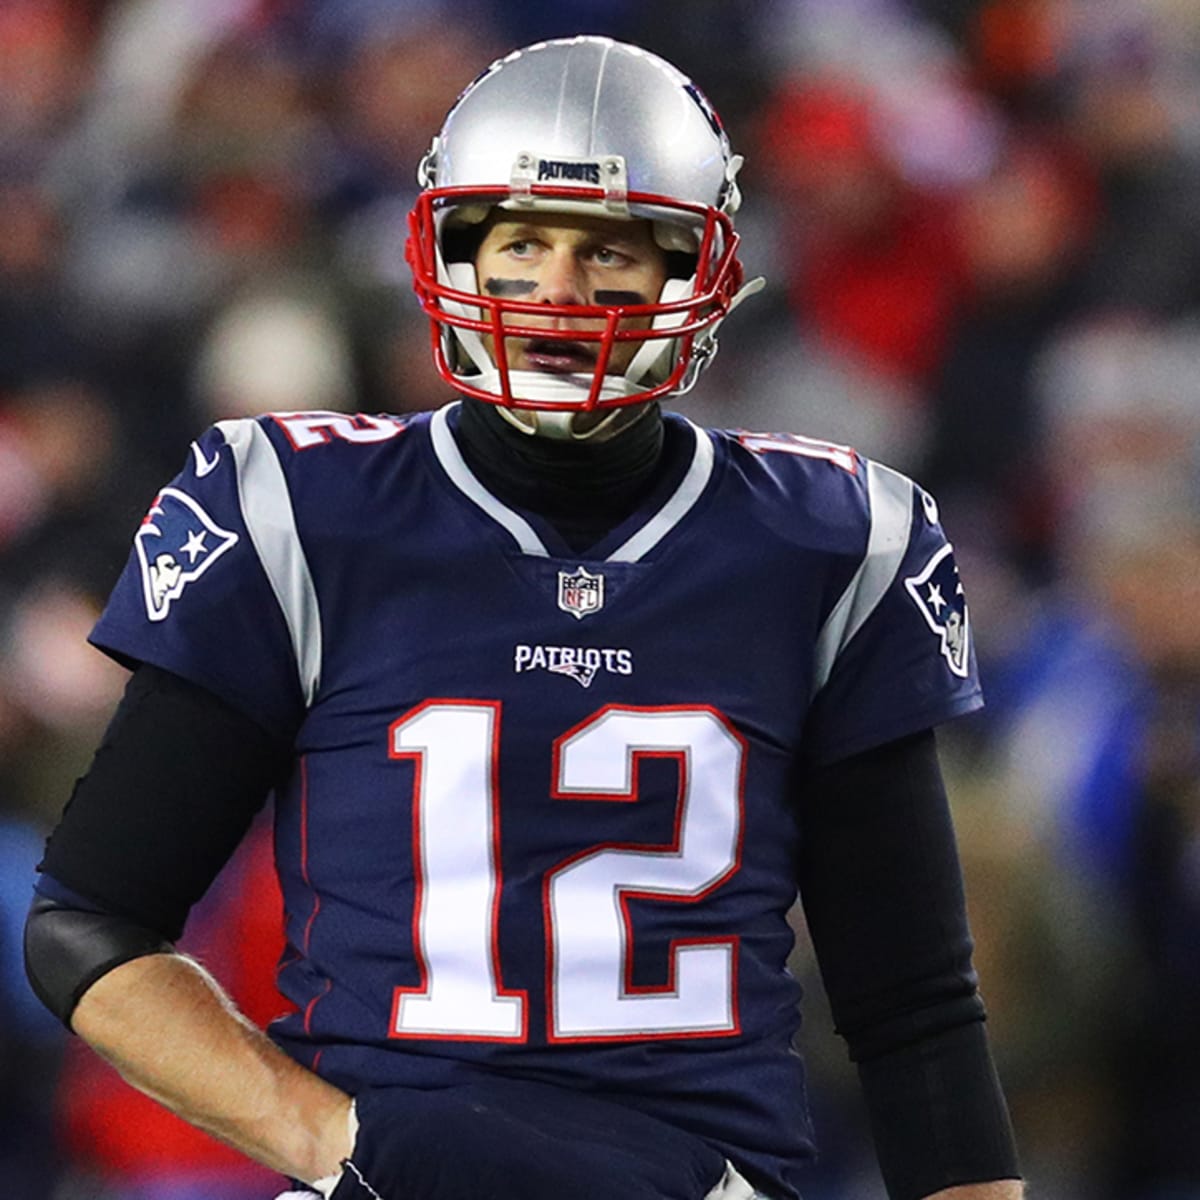 Get Up! reacts to Tom Brady ending interview after Alex Guerrero